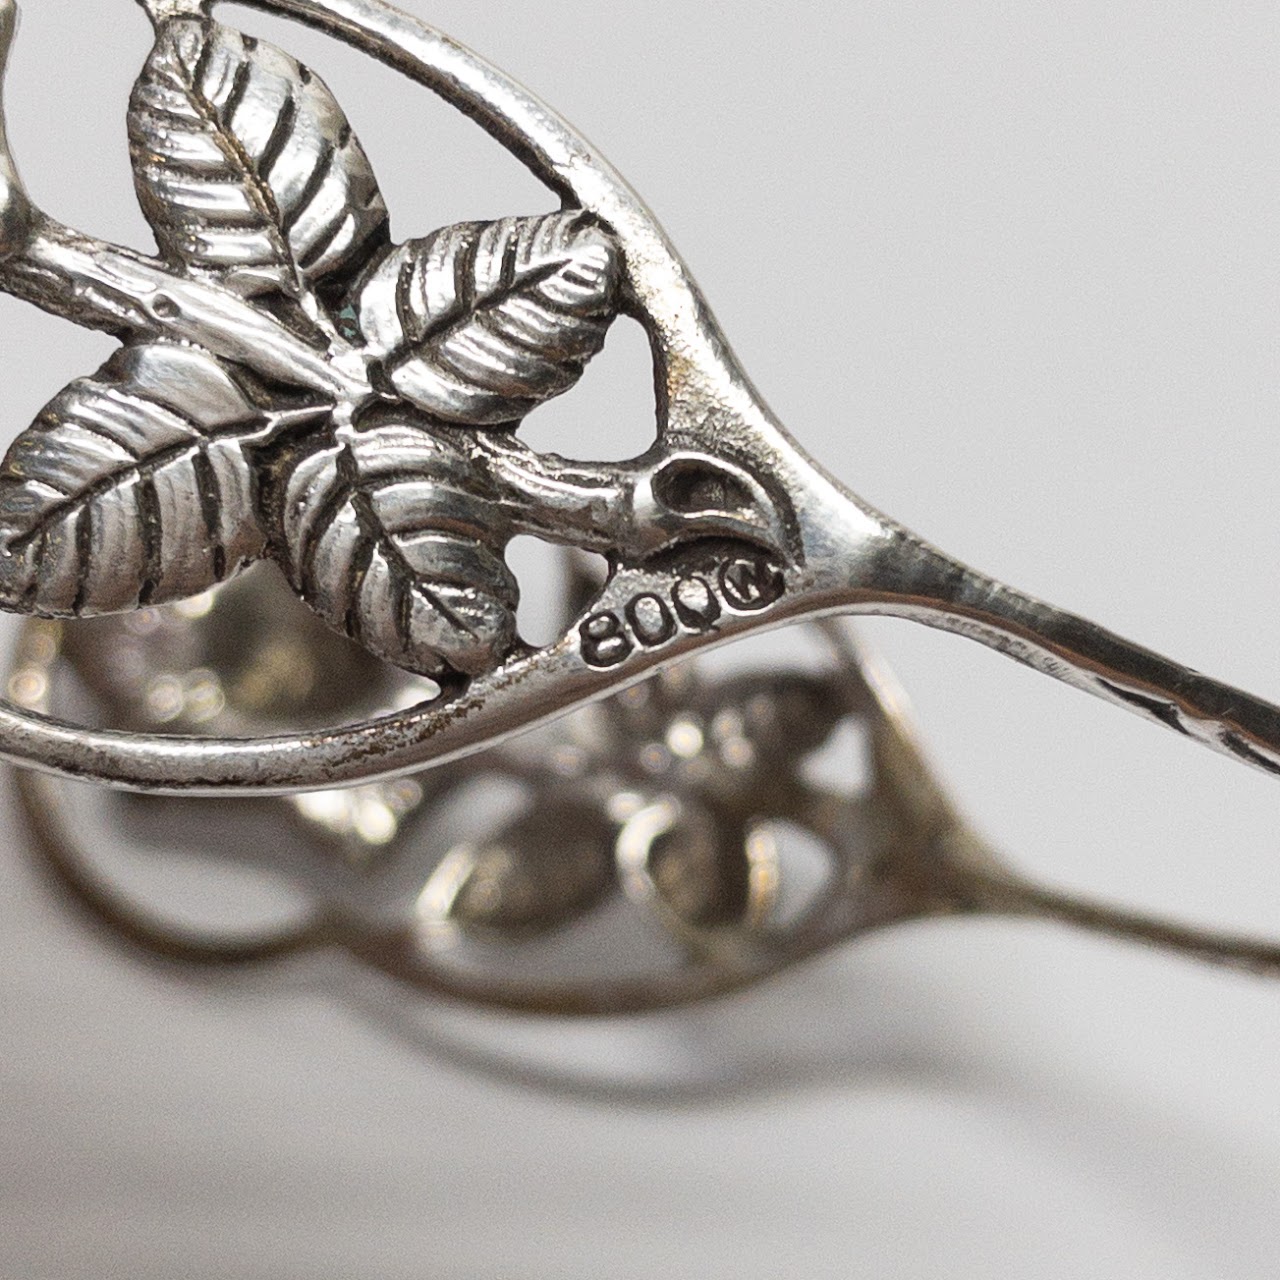 German Silver Shell & Rose Serving Spoon & Small Serving Tongs